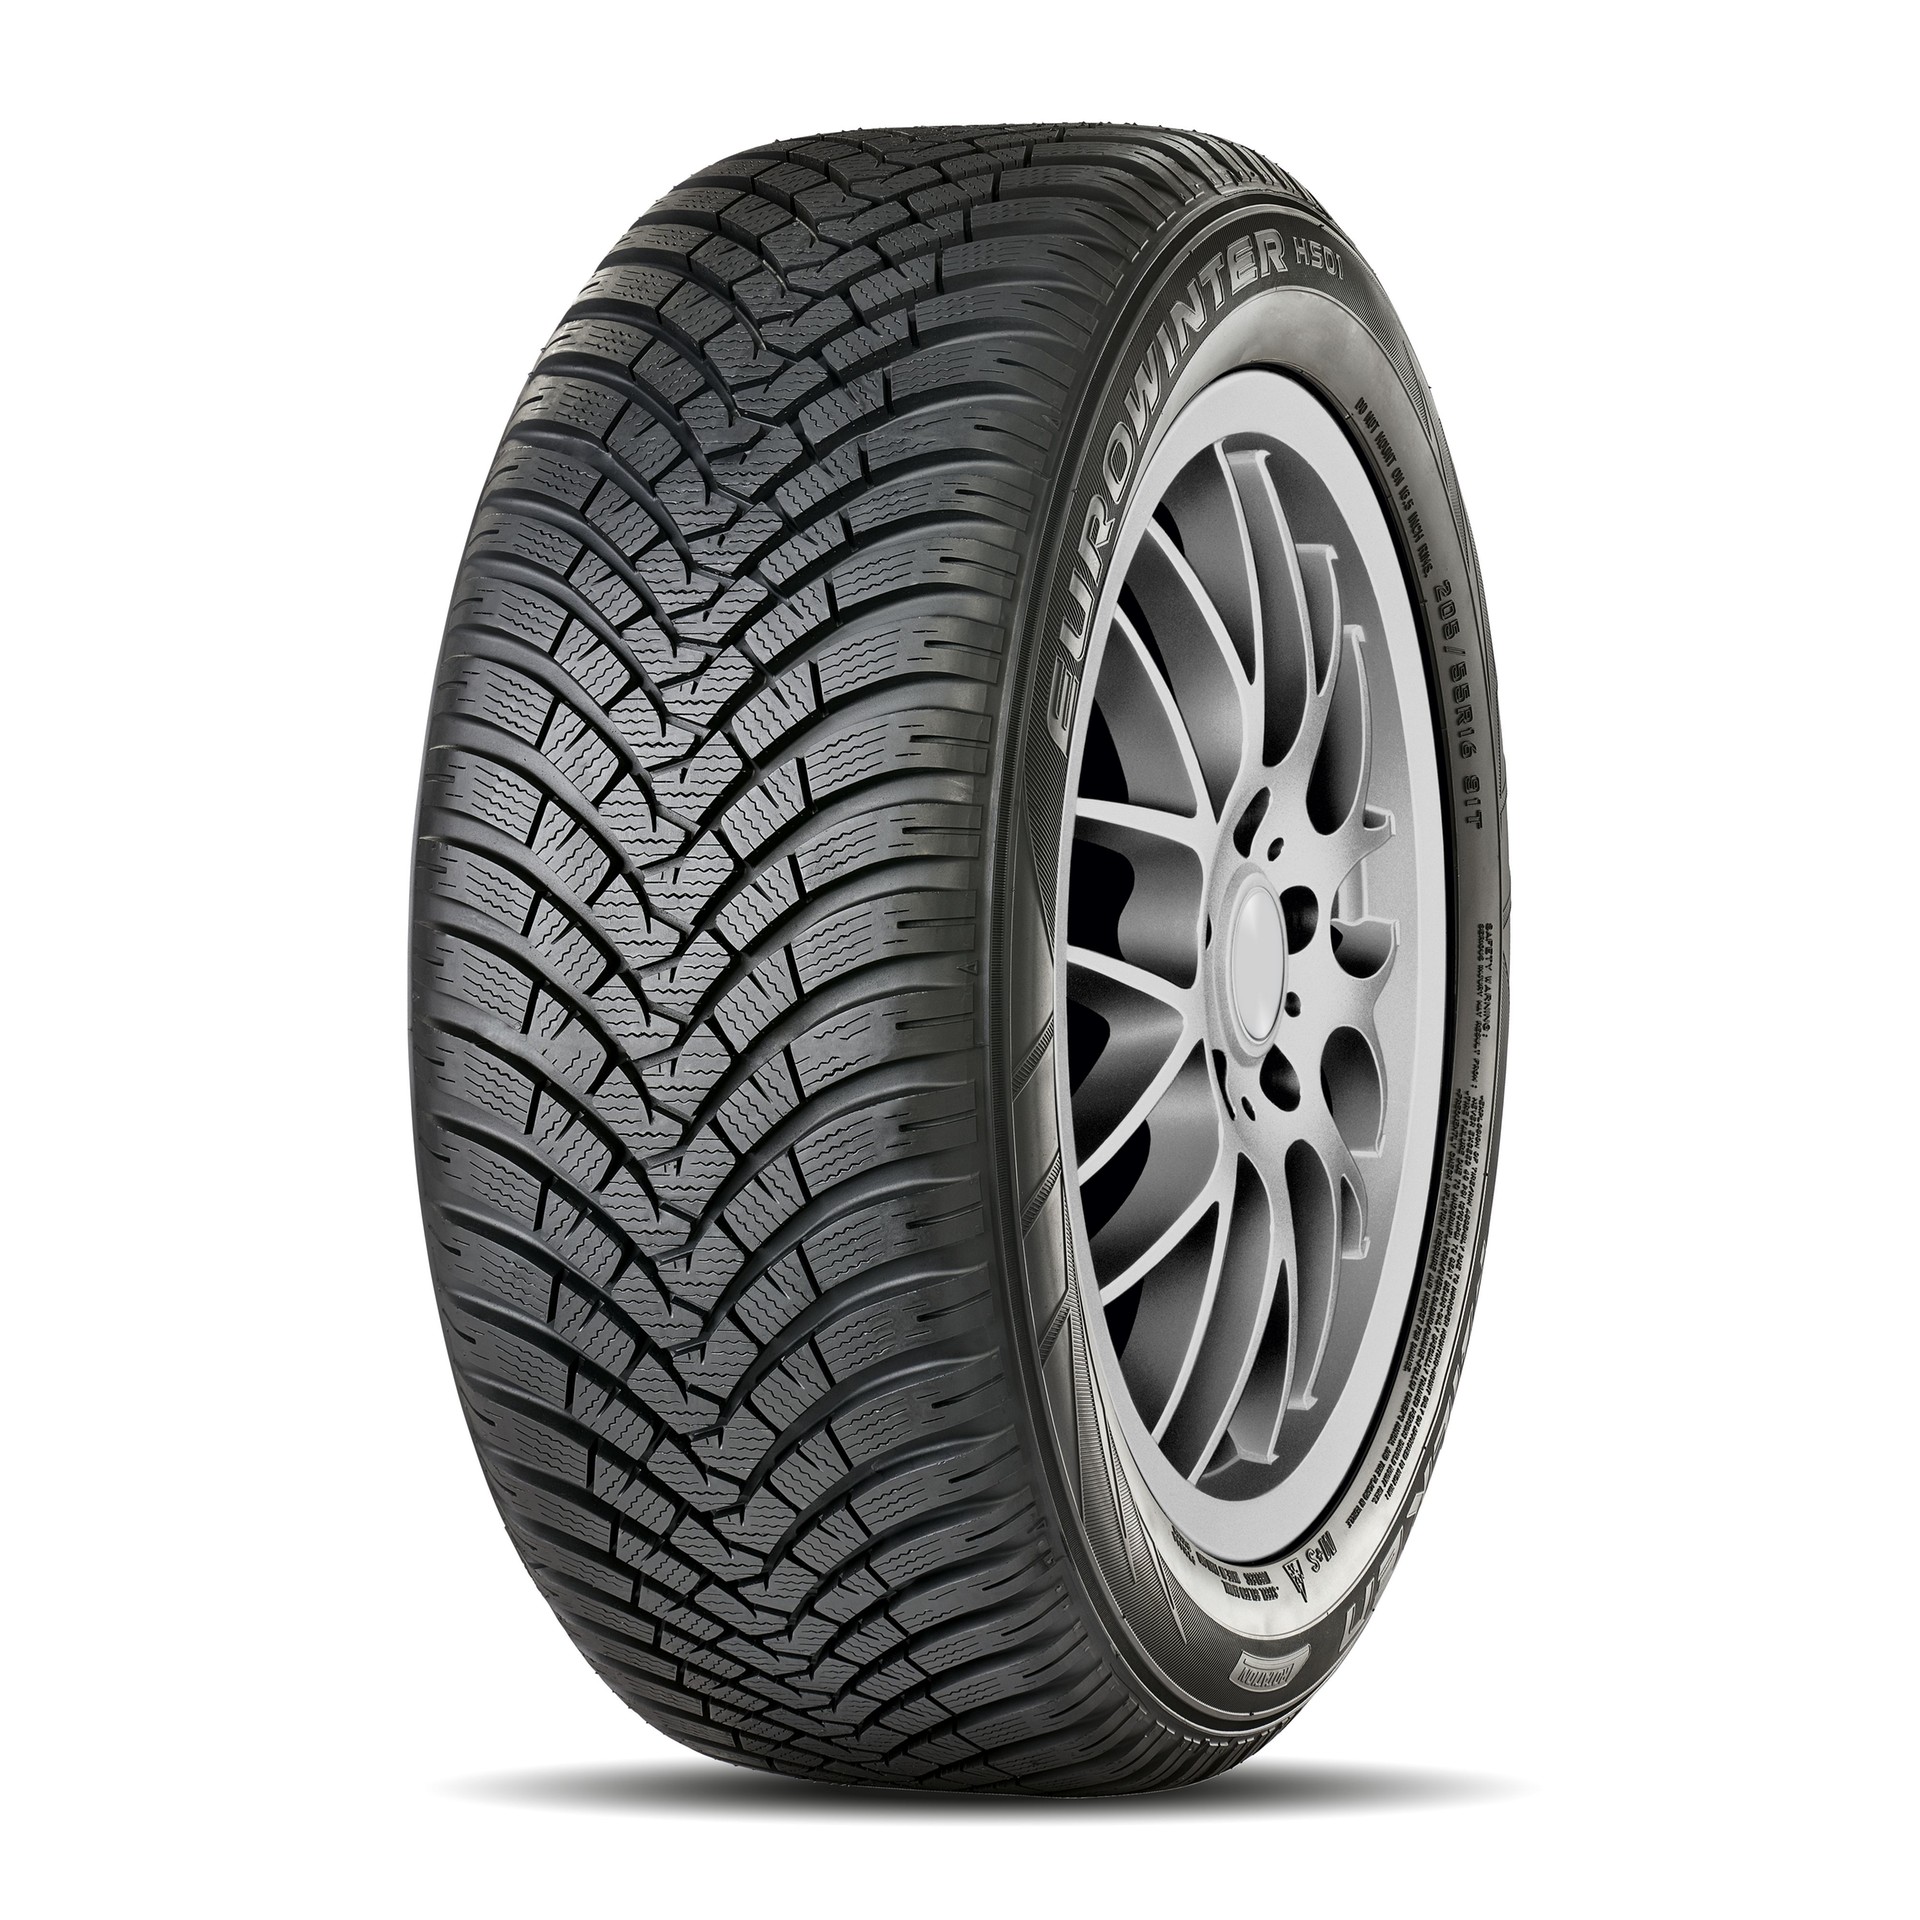 HS01 and Reviews Tests Falken Tire Eurowinter -